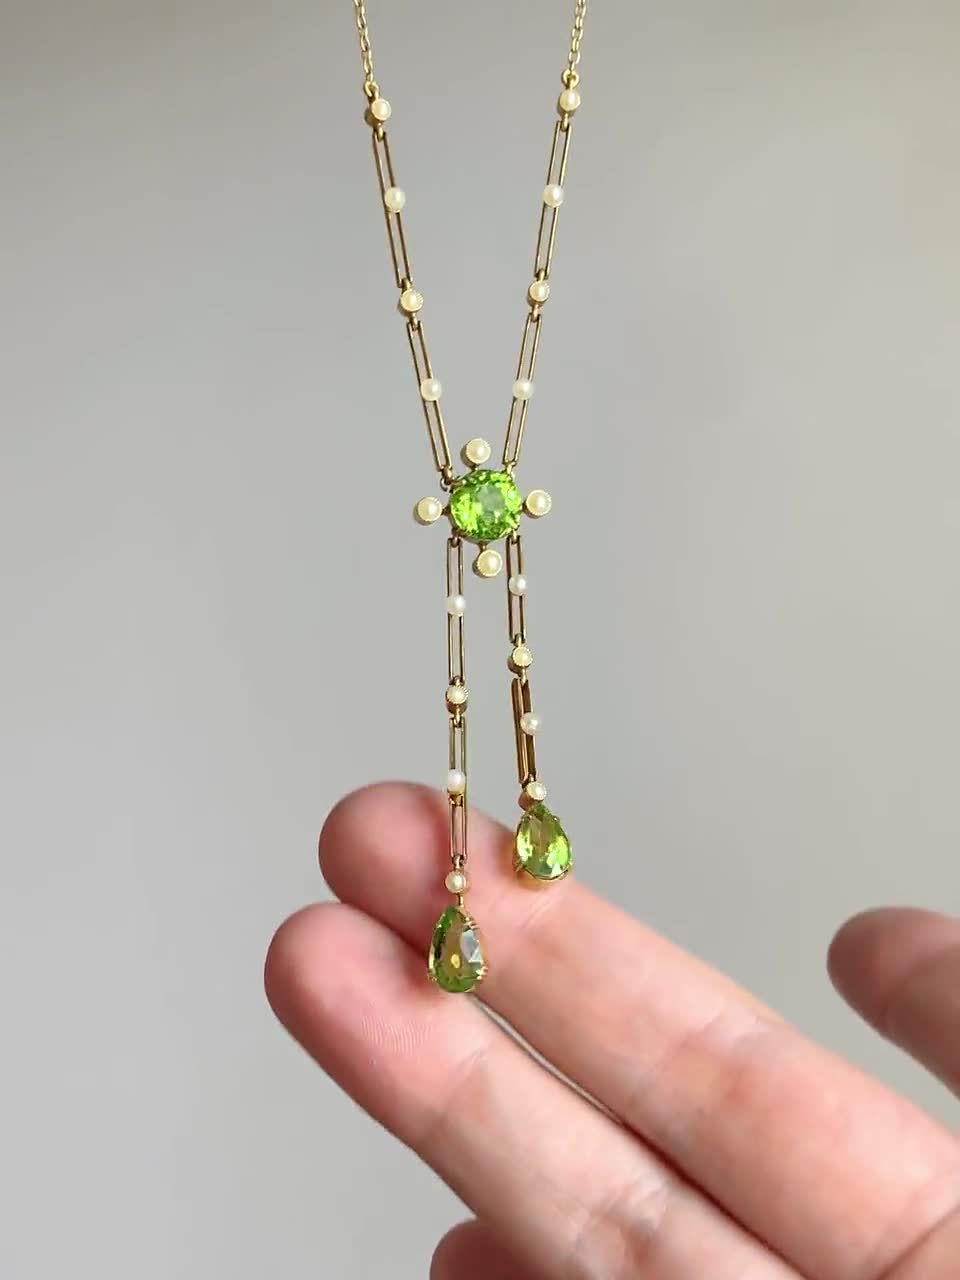 Pearl Necklace With Peridot. Freshwater Pearls With a Peridot in a Setting  on a Wire of Gold. - Etsy